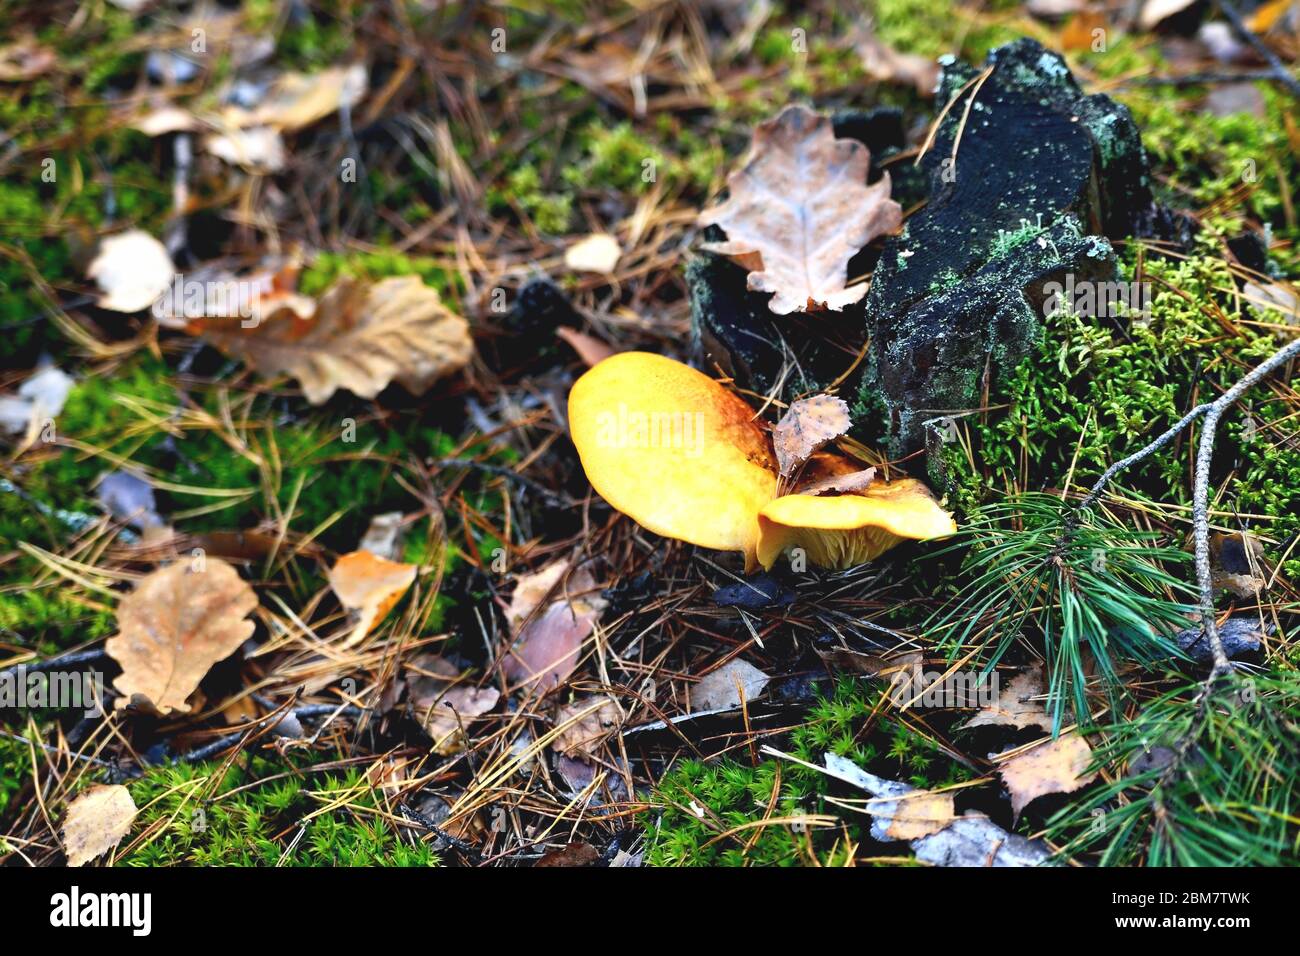 yellow poisonous yellow mushroom growing on an old rotten tree, green moss old stump forest autumn, close-up Stock Photo